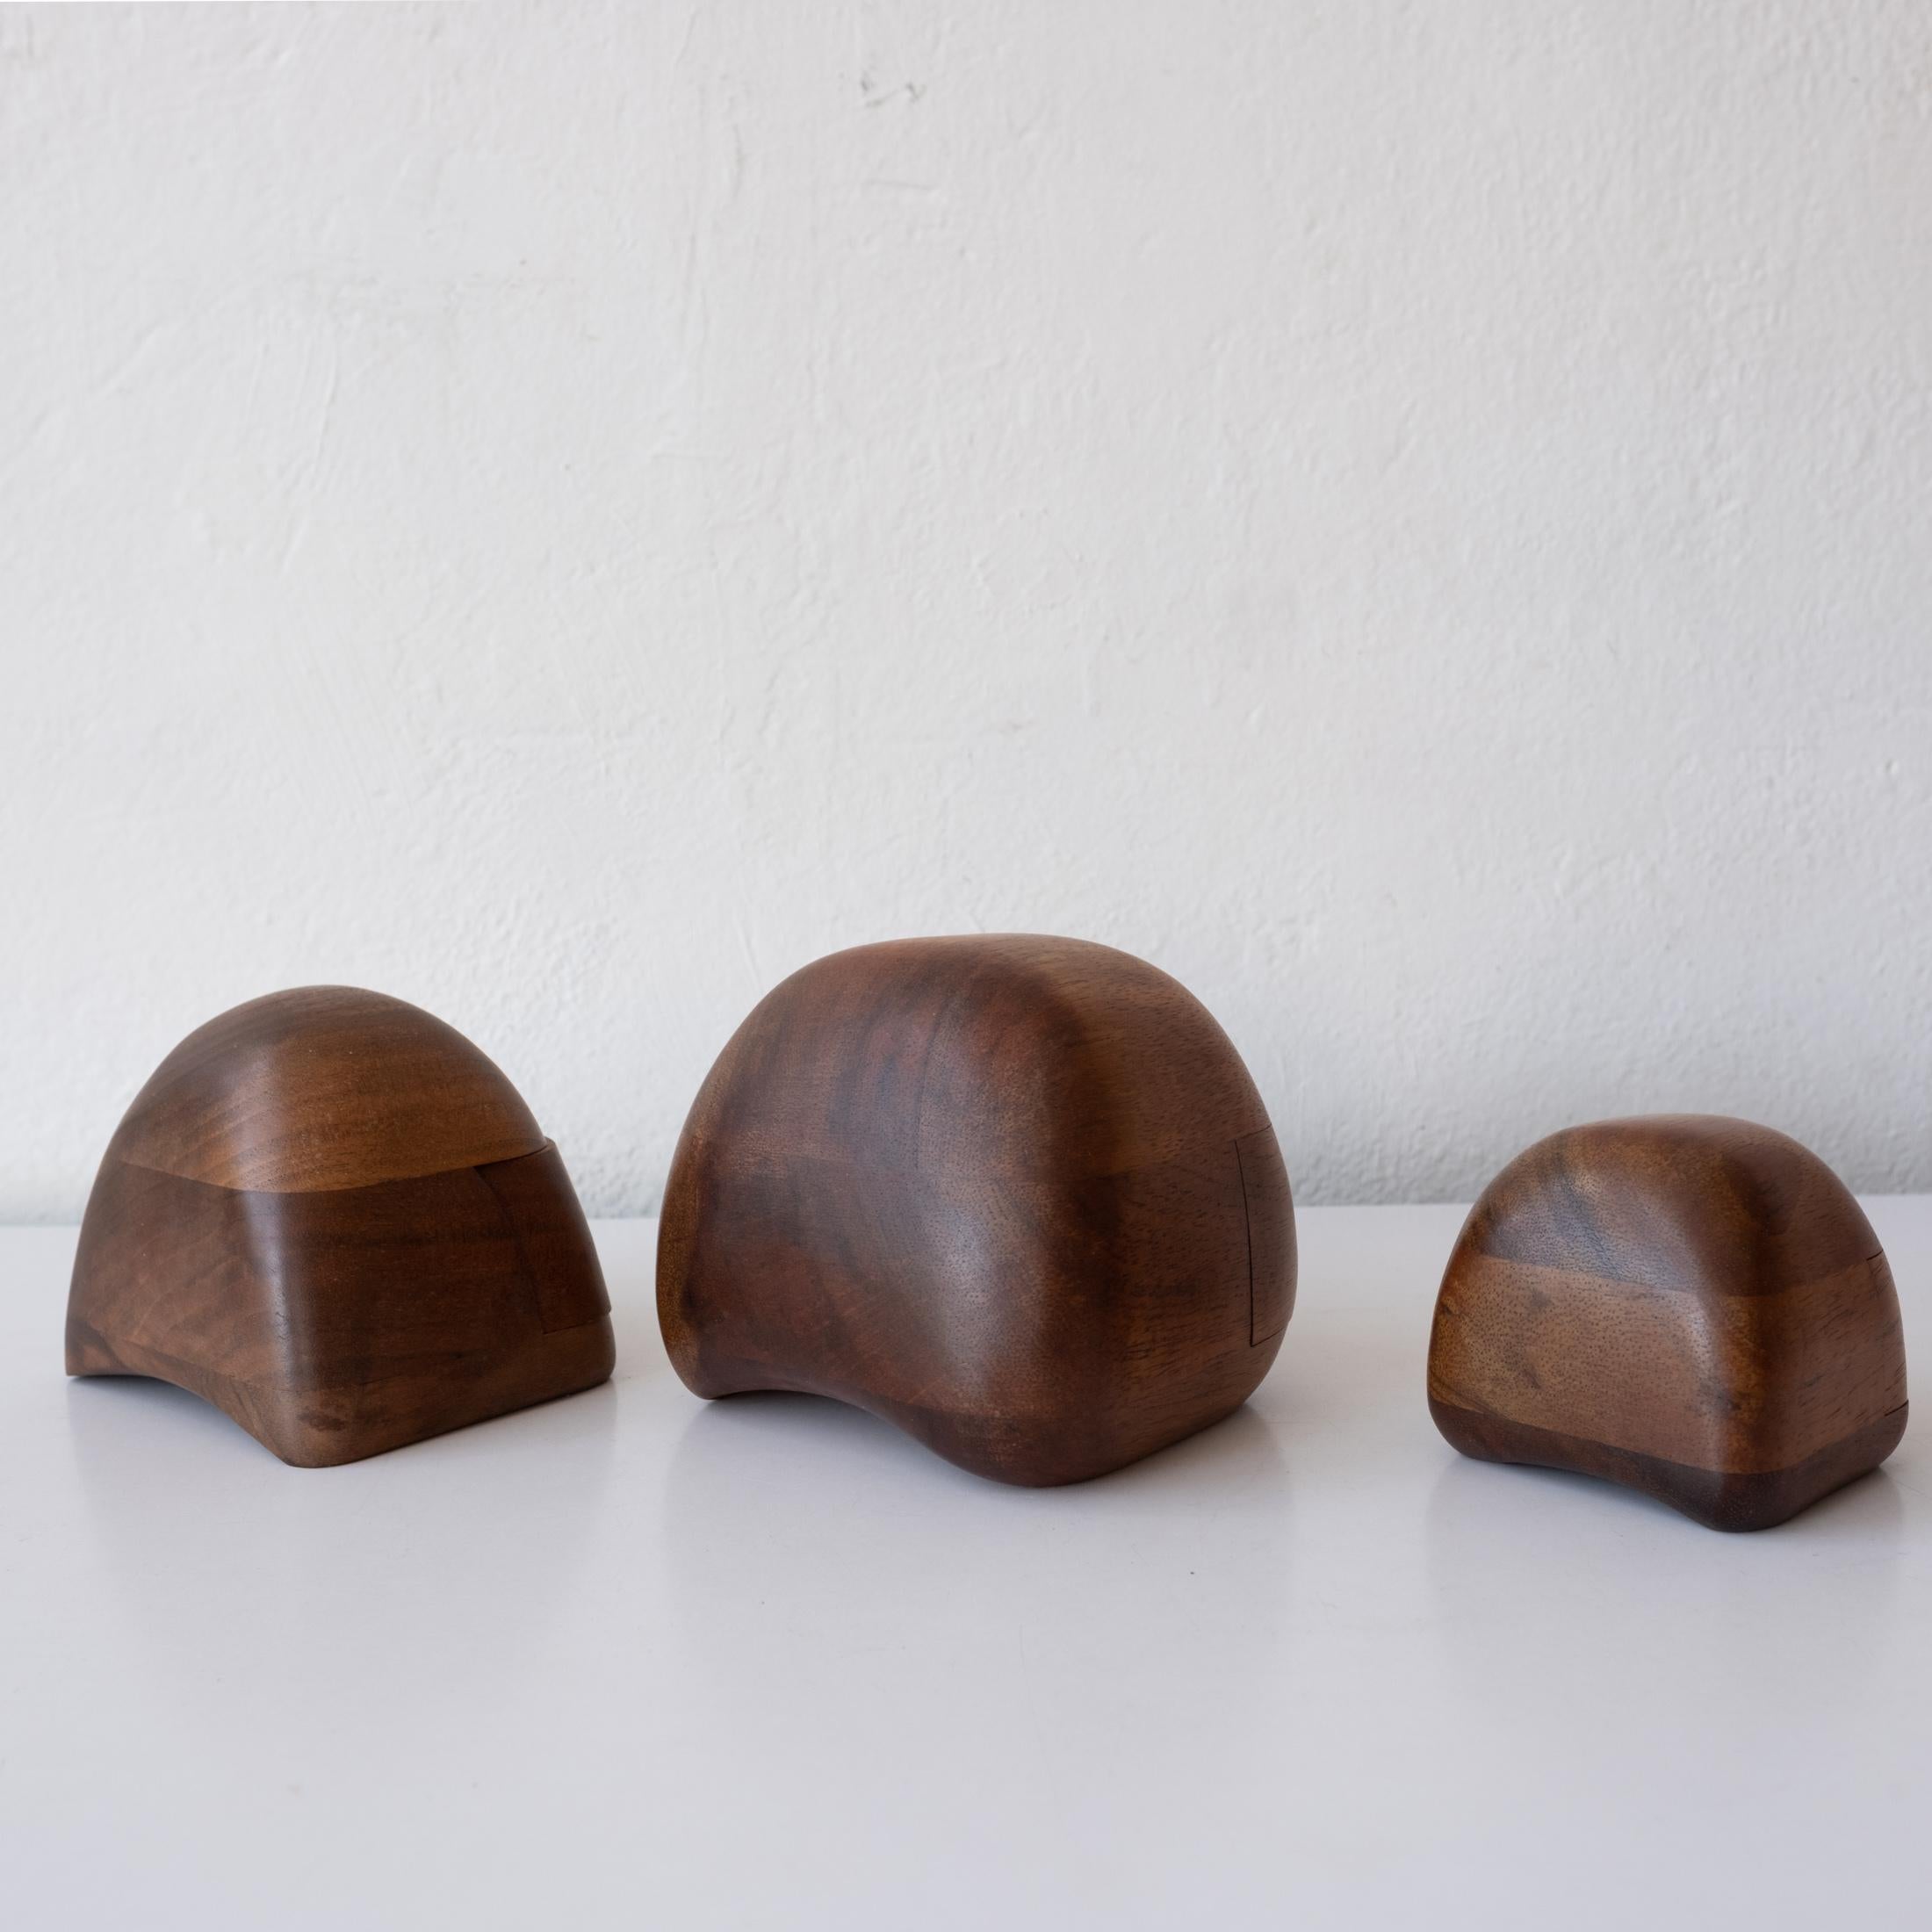 Studio Handcrafted Wood Jewelry Boxes by Dean Santner, 1970s For Sale 10